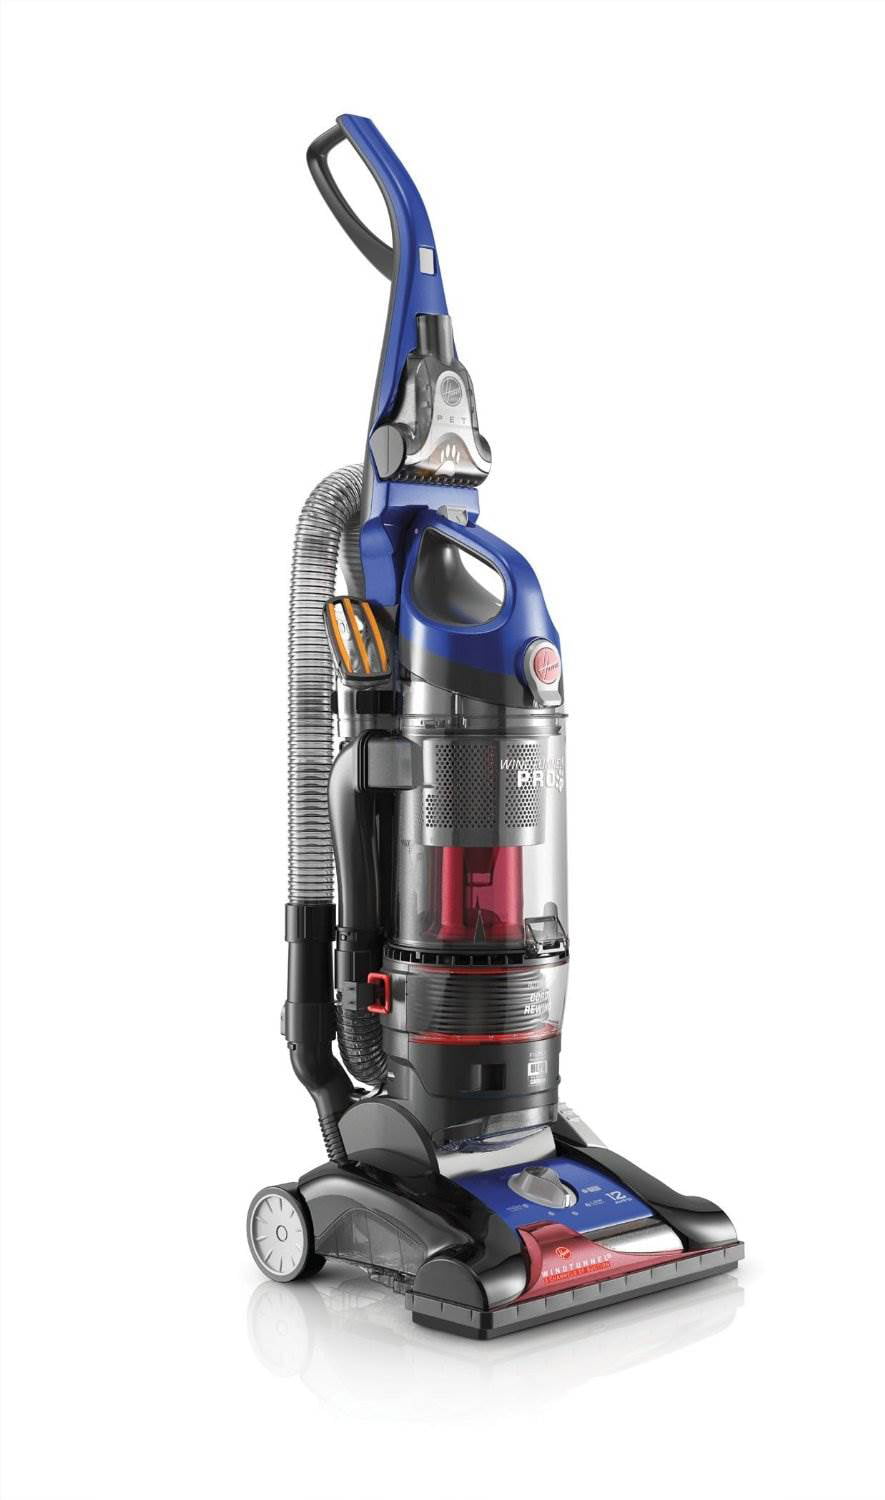 Hoover WindTunnel 3 Pro Pet Bagless Upright Vacuum Cleaner UH70937 UH70935